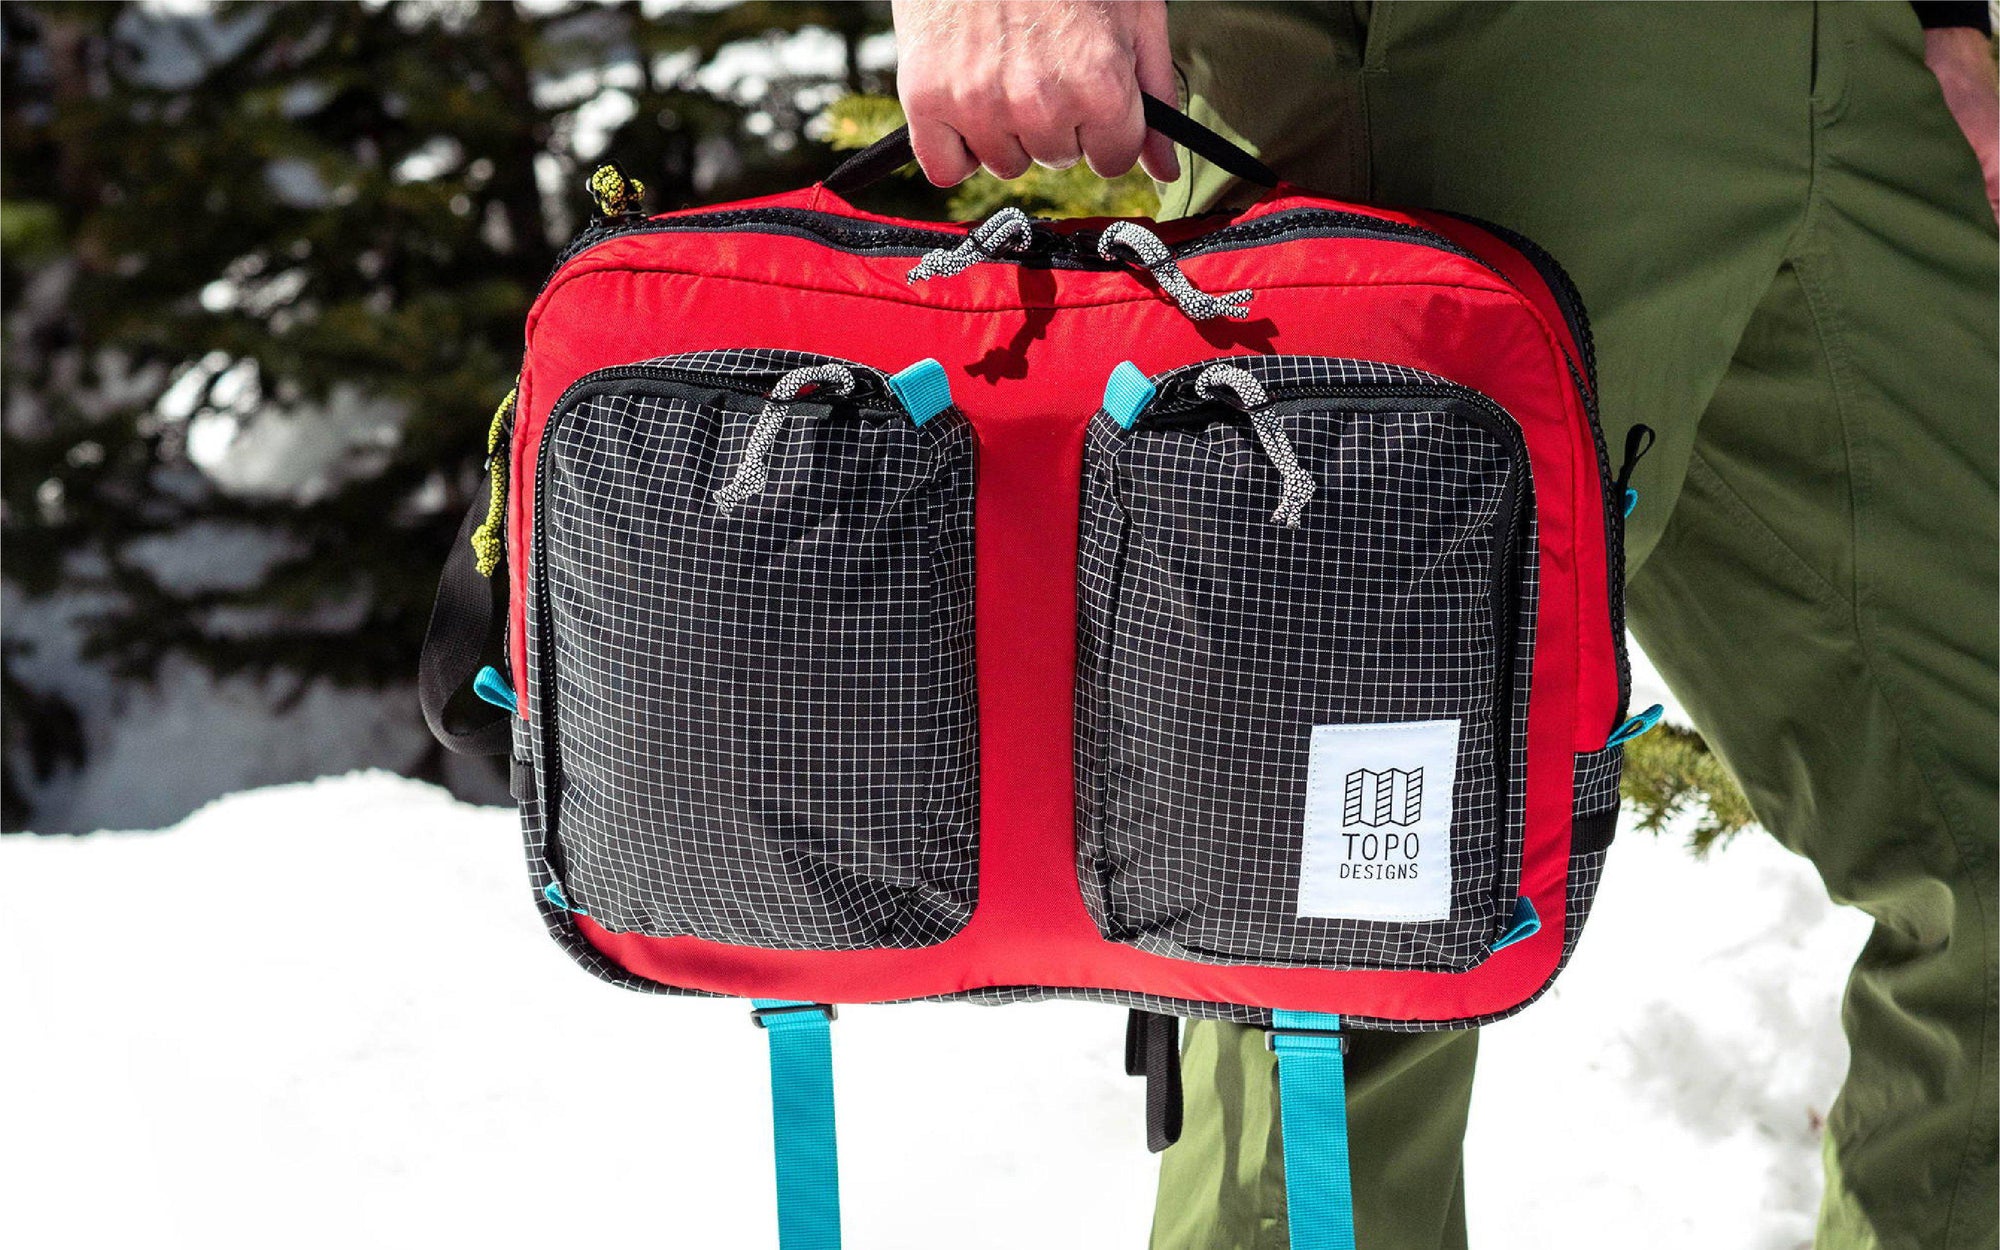 Topo Designs : Made For Anywhere On Your Map